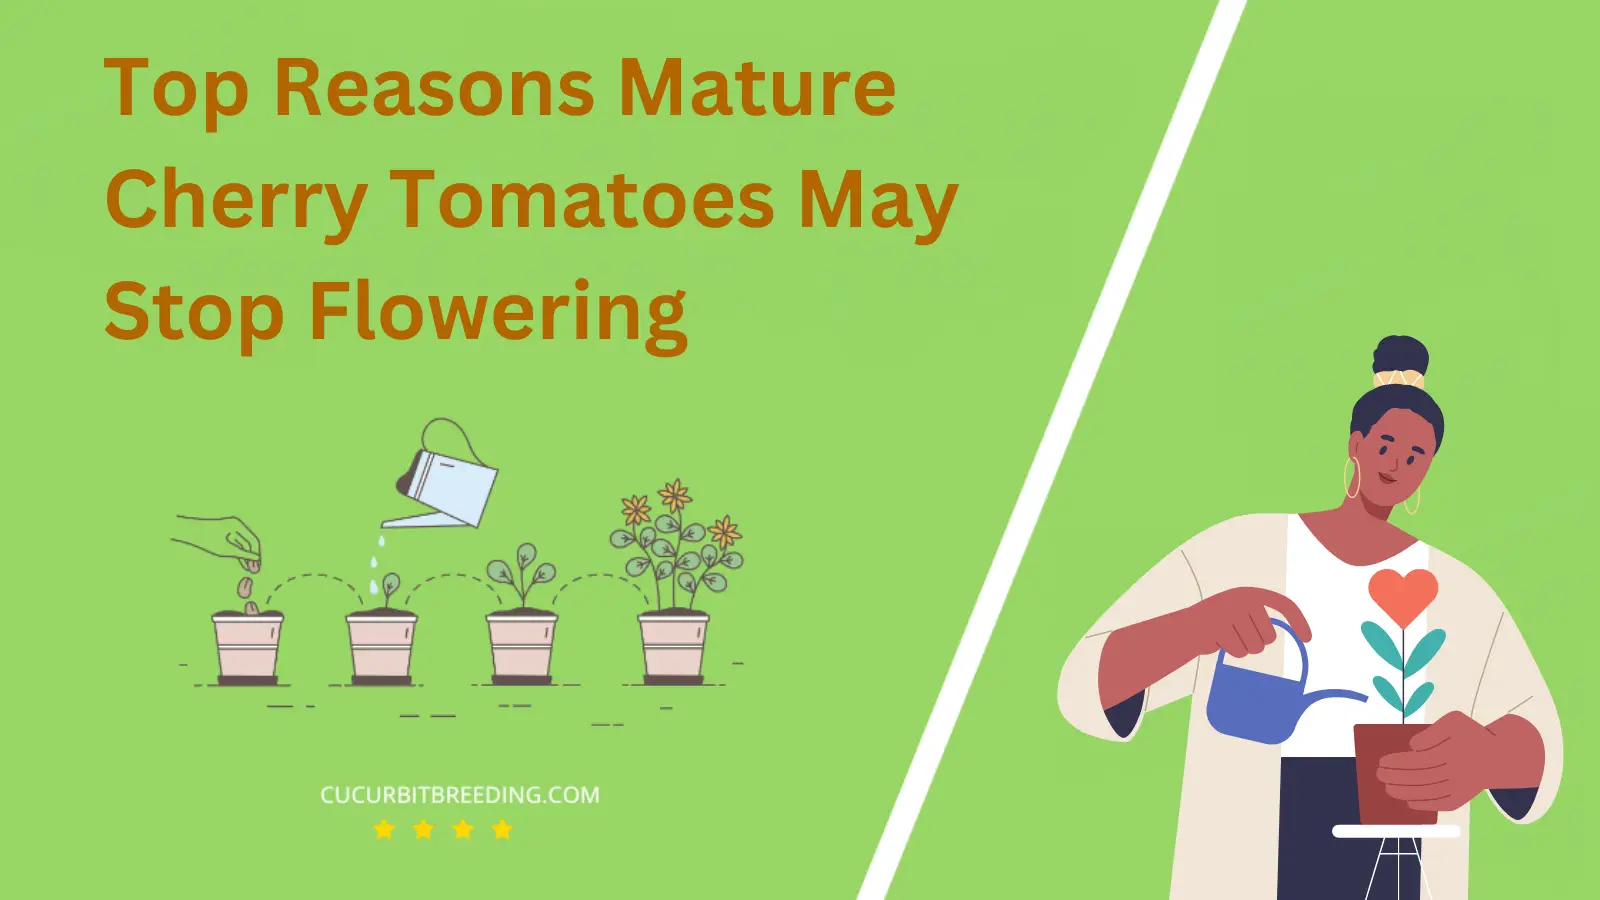 Top Reasons Mature Cherry Tomatoes May Stop Flowering